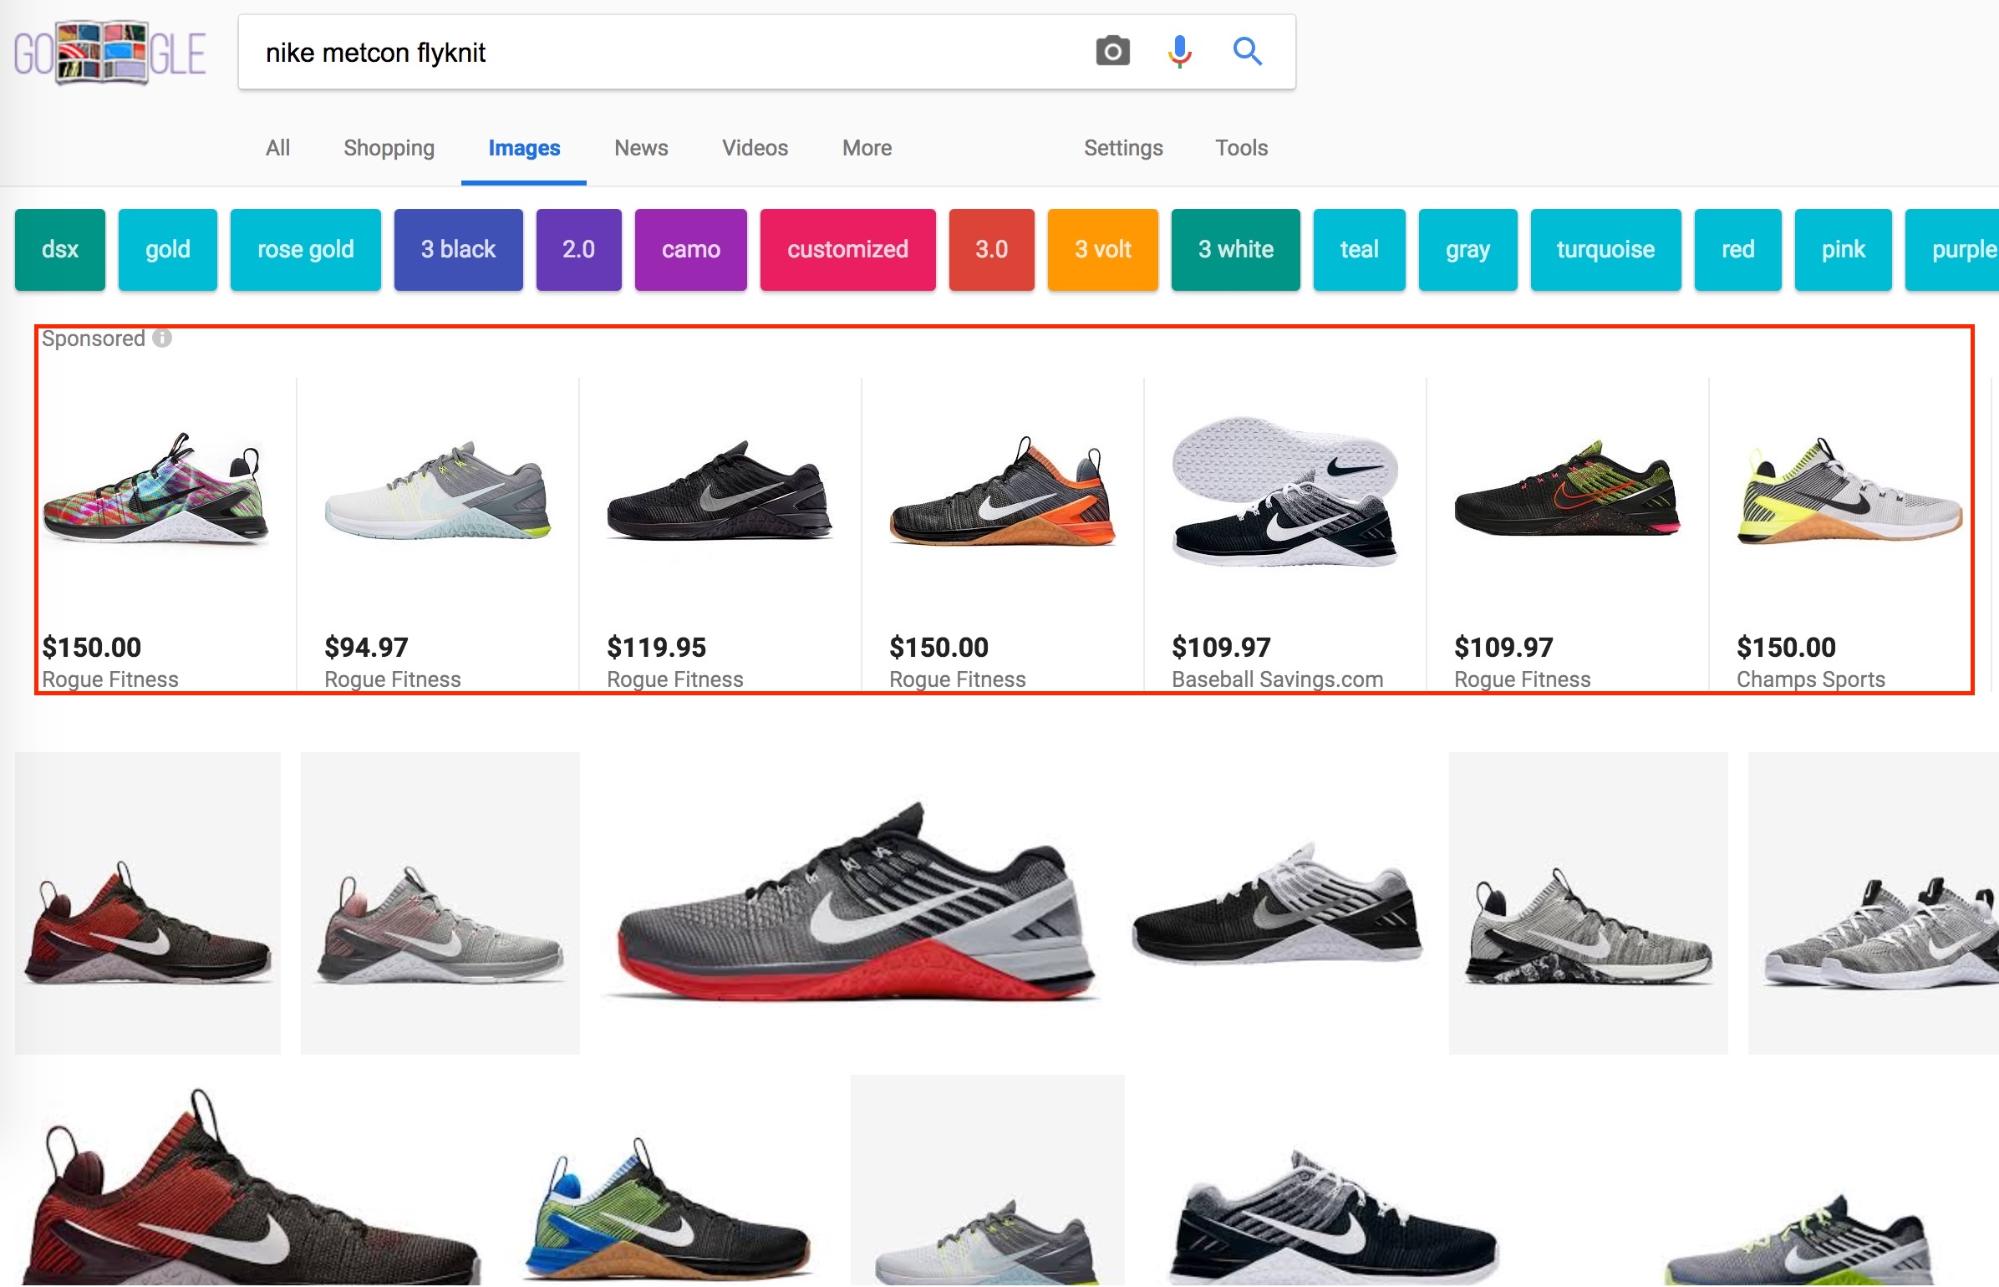 Screenshot showing google image search results